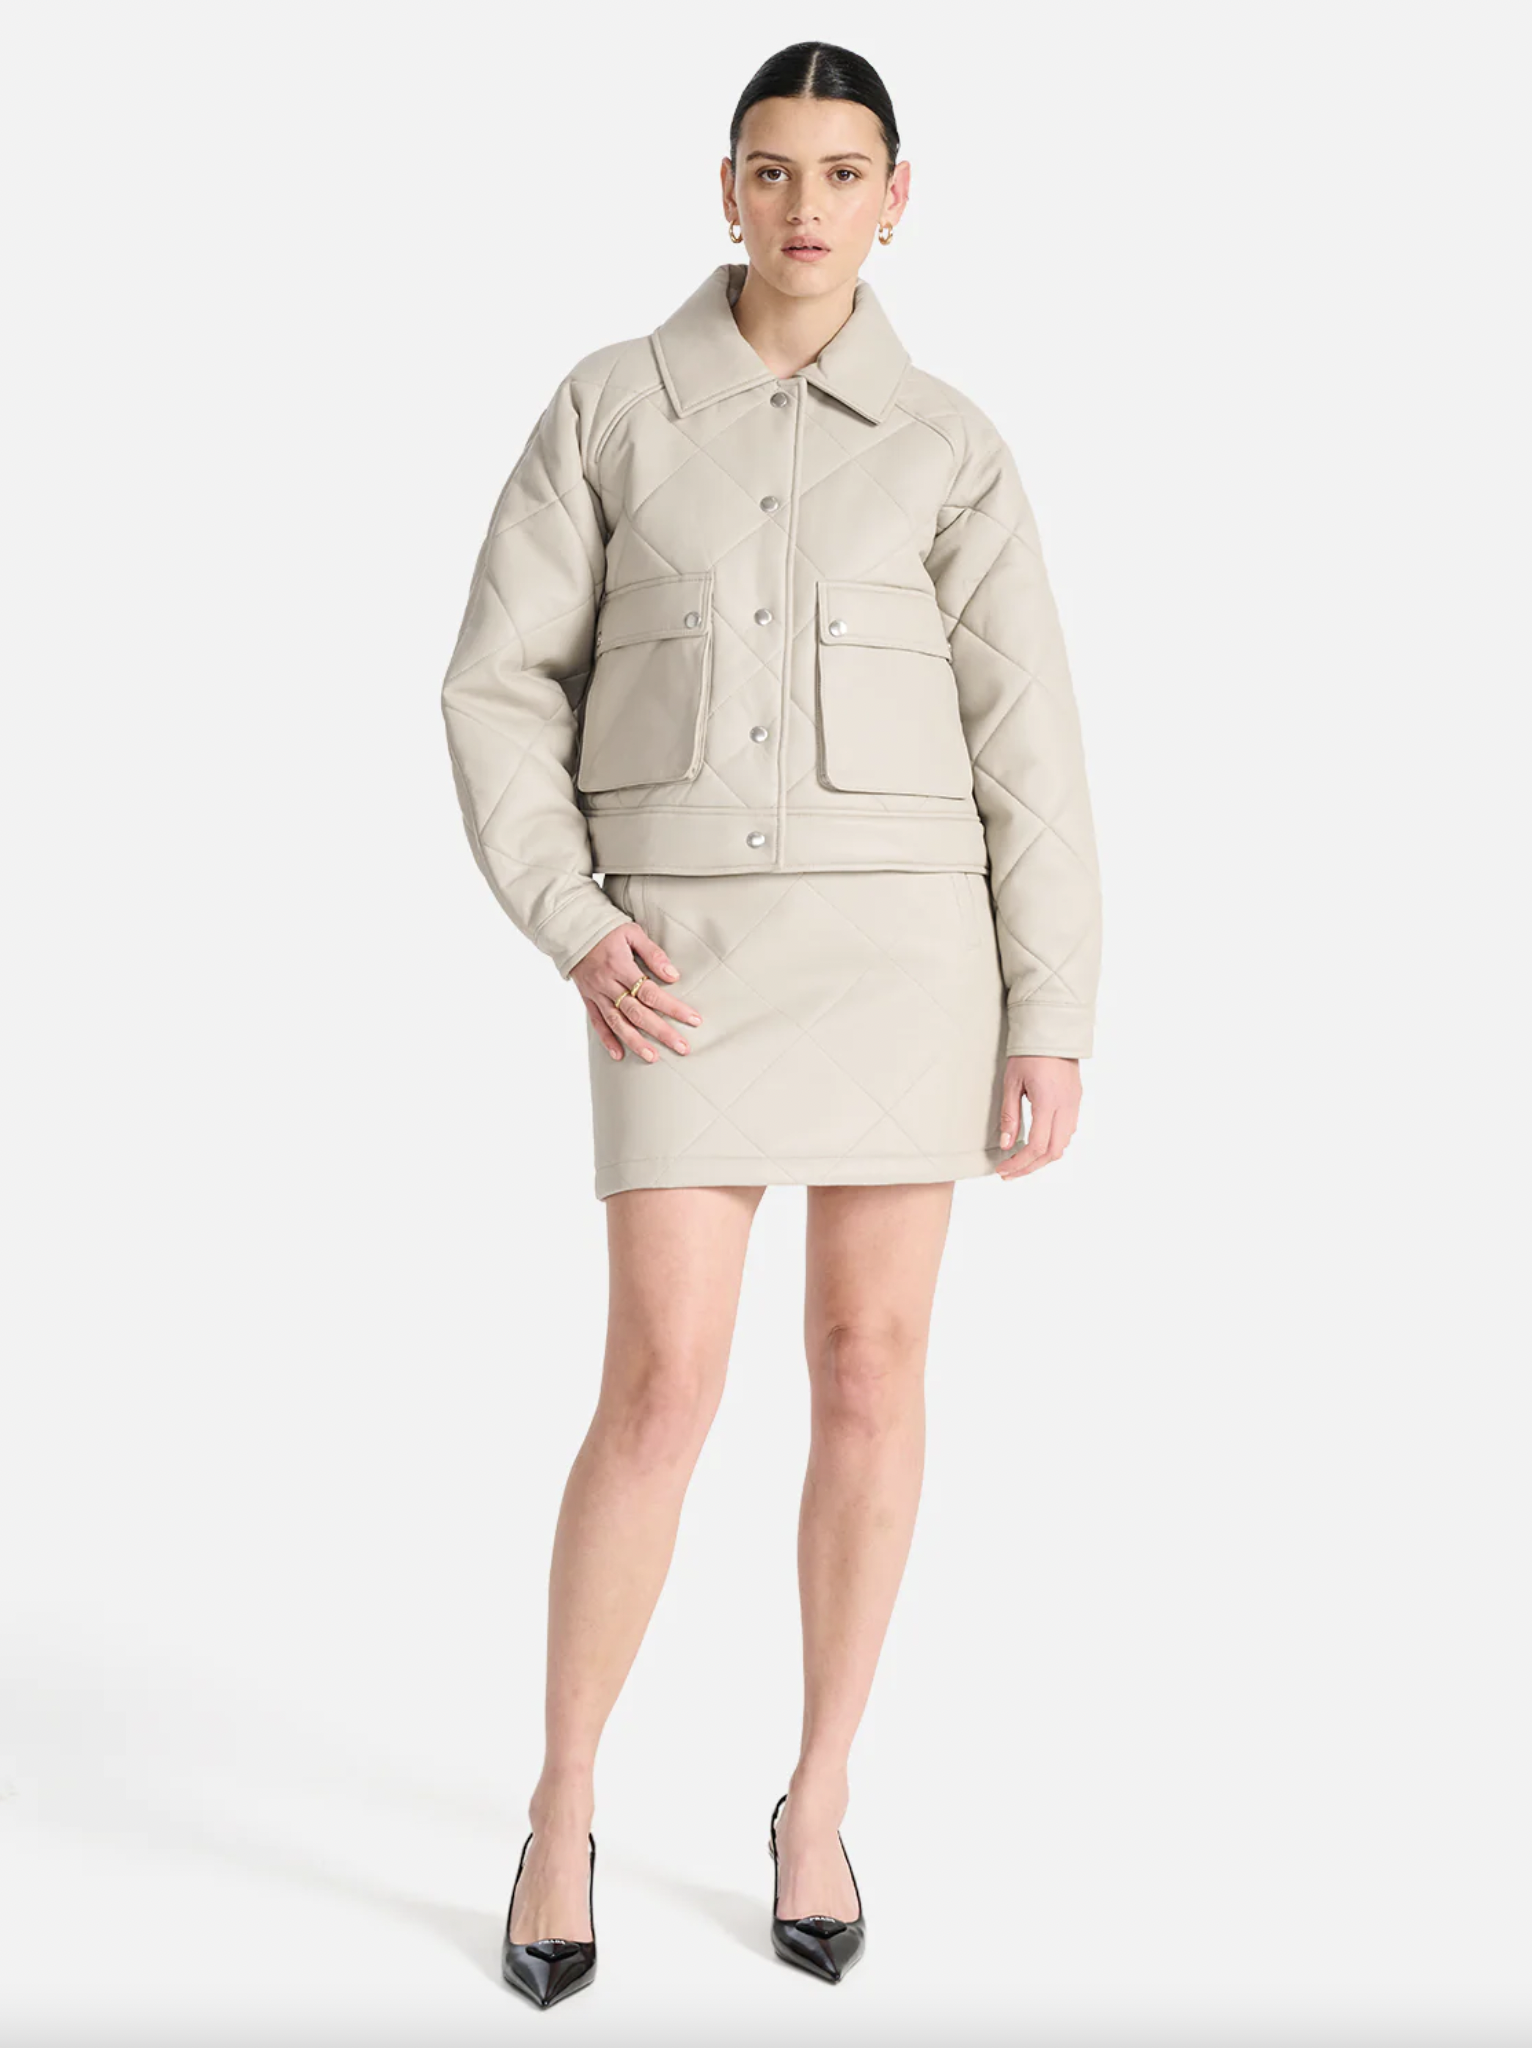 Ena Pelly - Loretta Quilted Leather Jacket in Turtle Dove